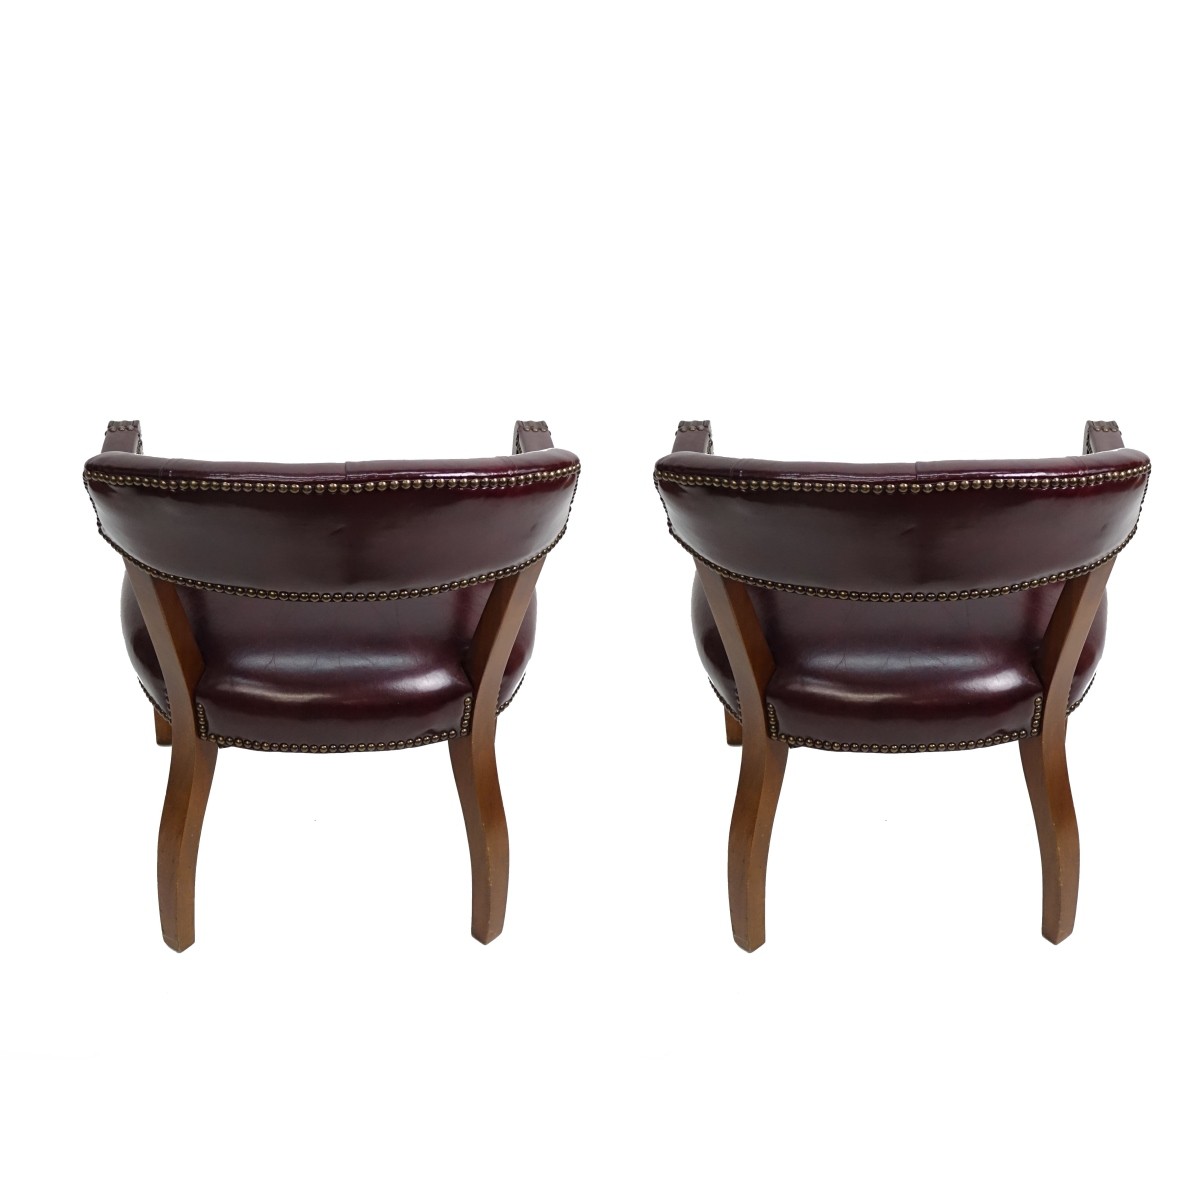 Pair of Steven's Leather Chairs